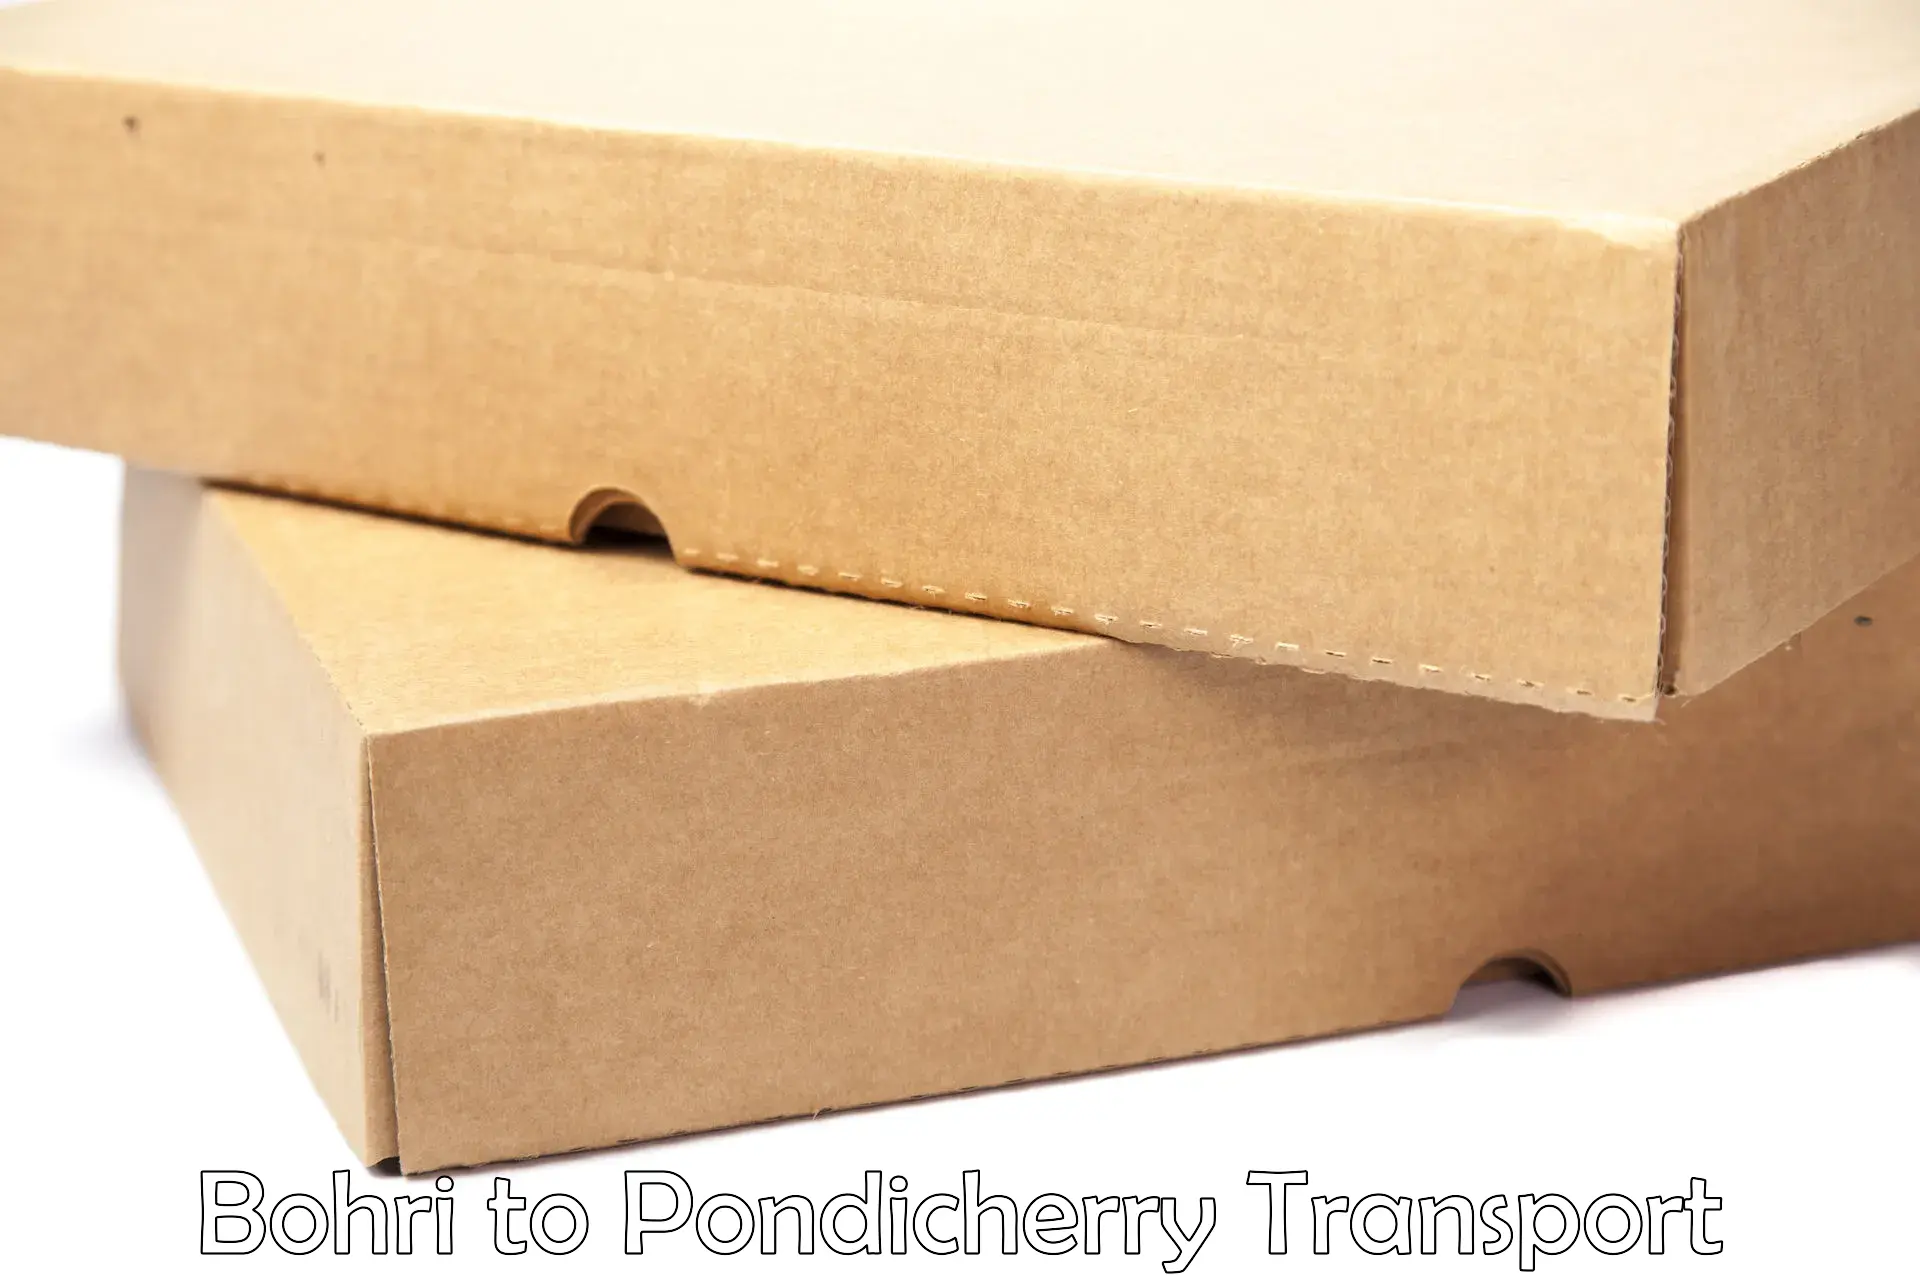 Daily parcel service transport in Bohri to Pondicherry